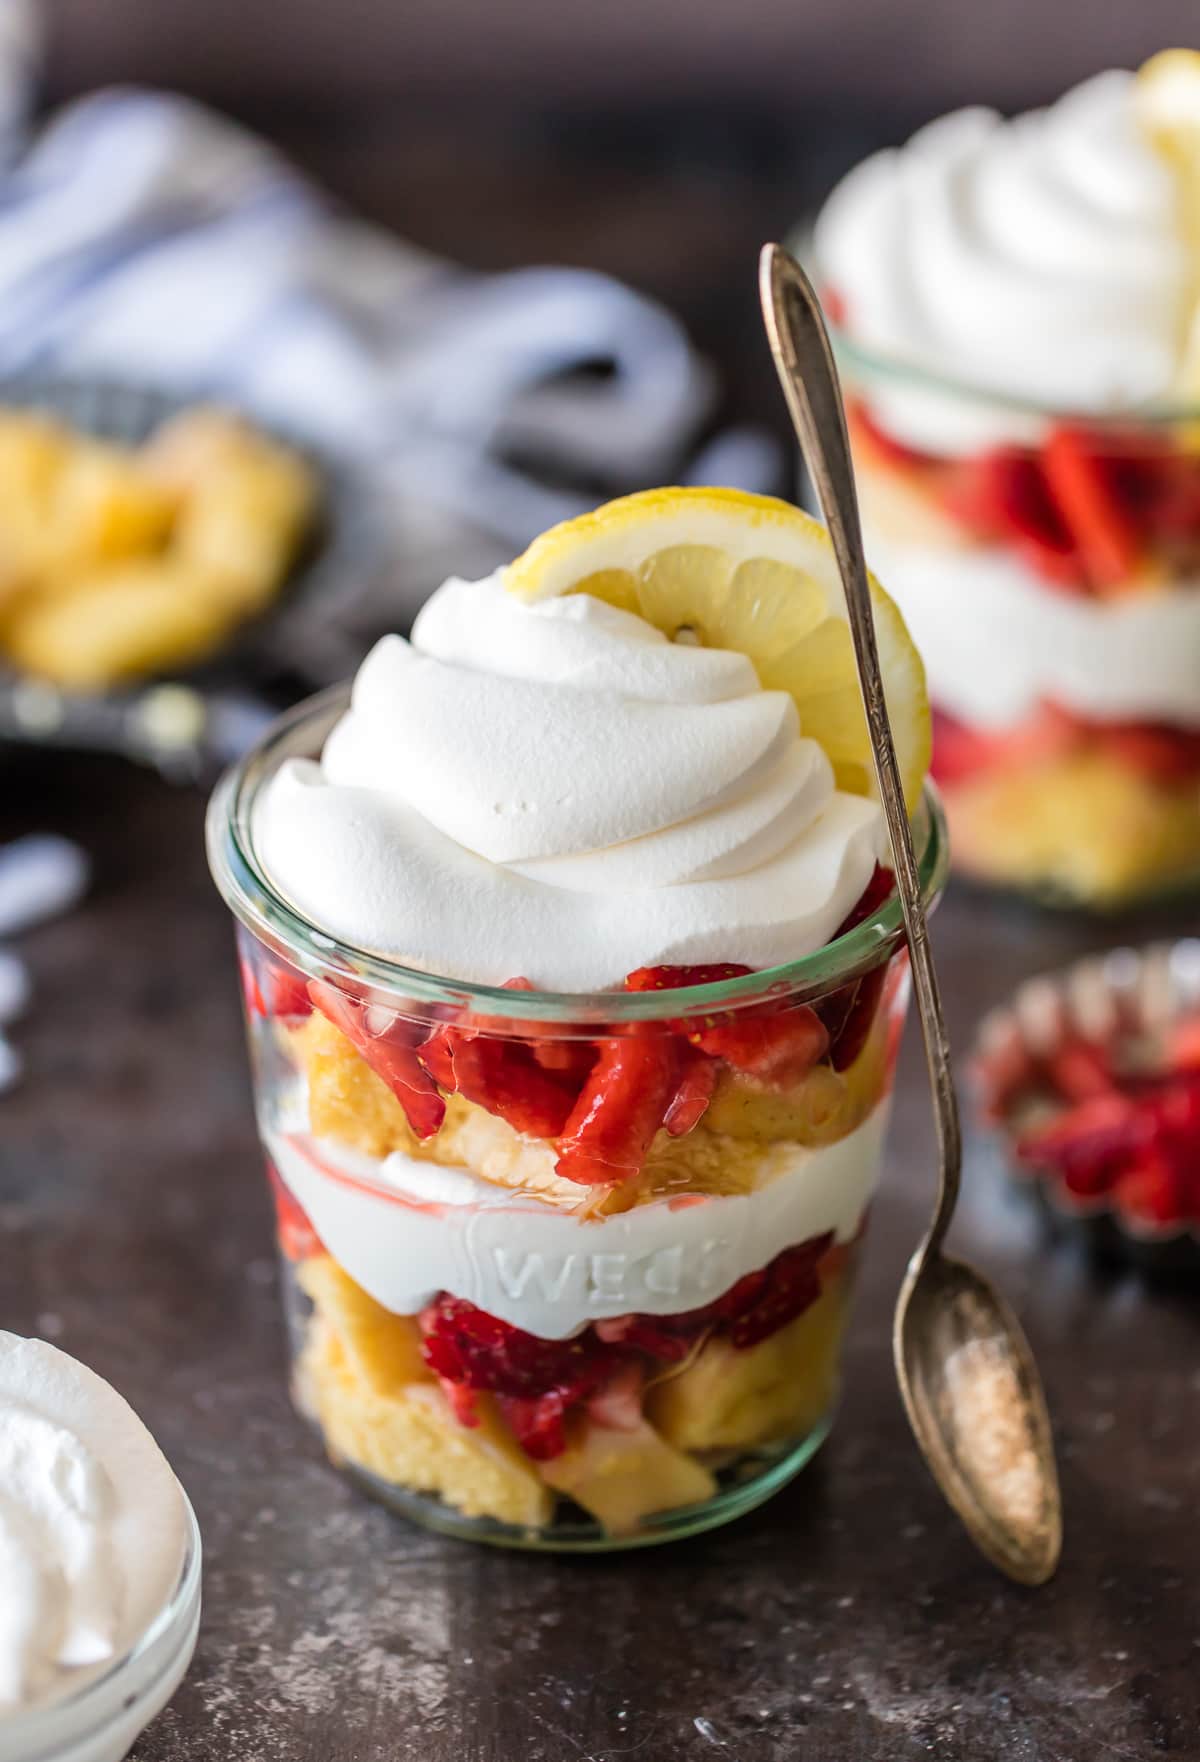 These LAYERED LEMON STRAWBERRY SHORTCAKE CUPS are super simple and delicious! Layers of lemon cake, strawberries, and cool whip make the best sweet treat for after school or anytime!